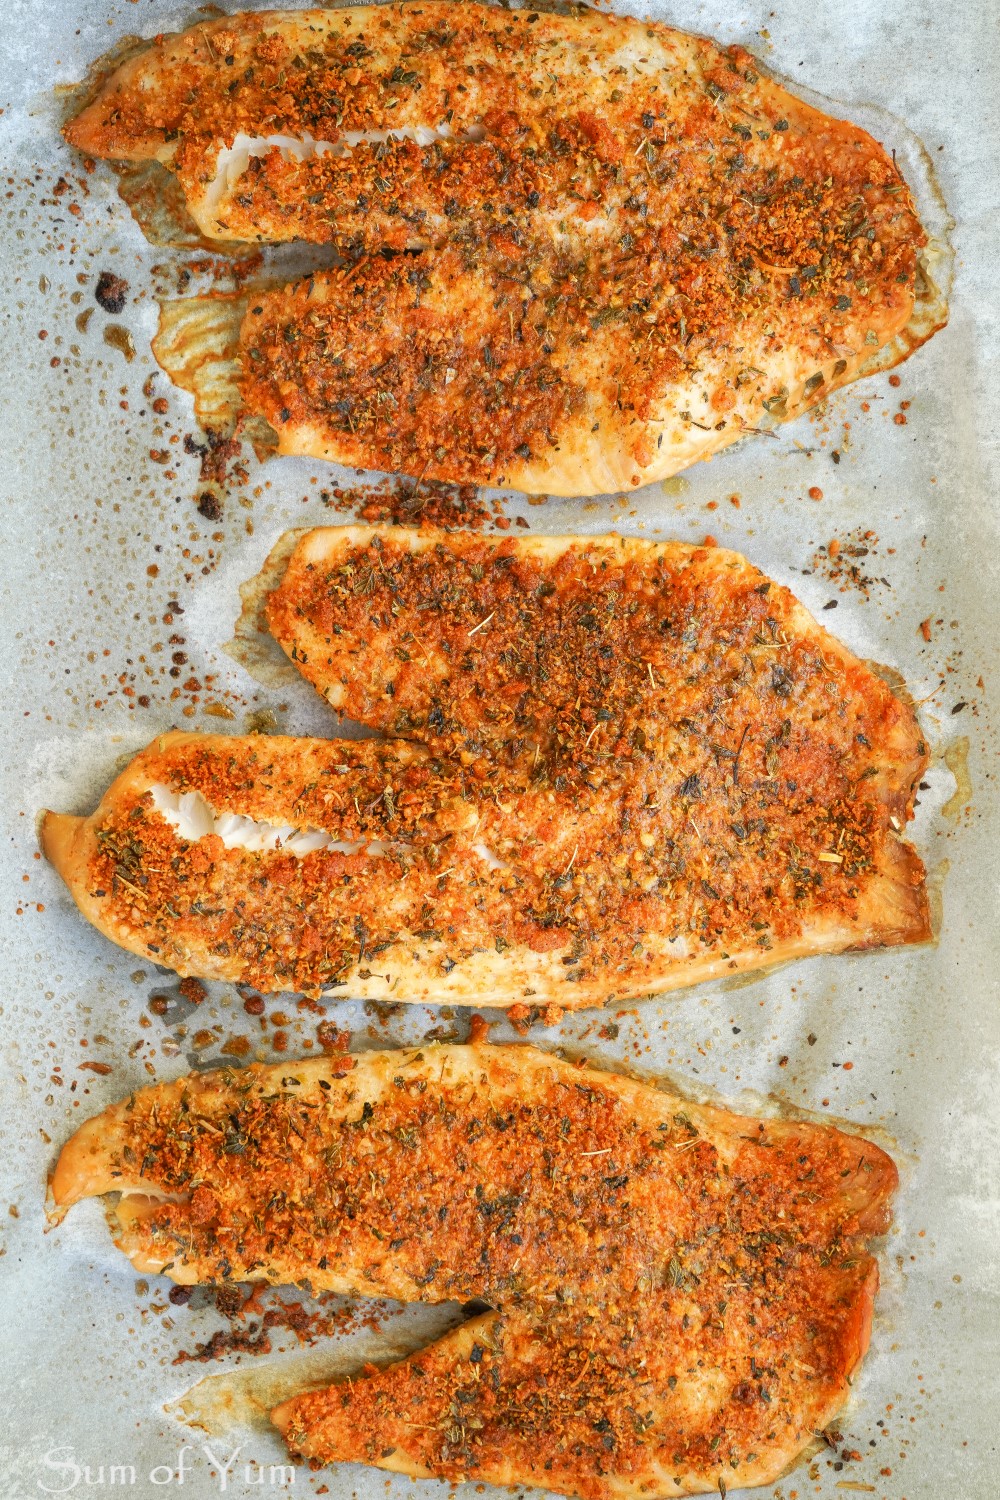 Baked Parmesan and Herb Crusted Tilapia